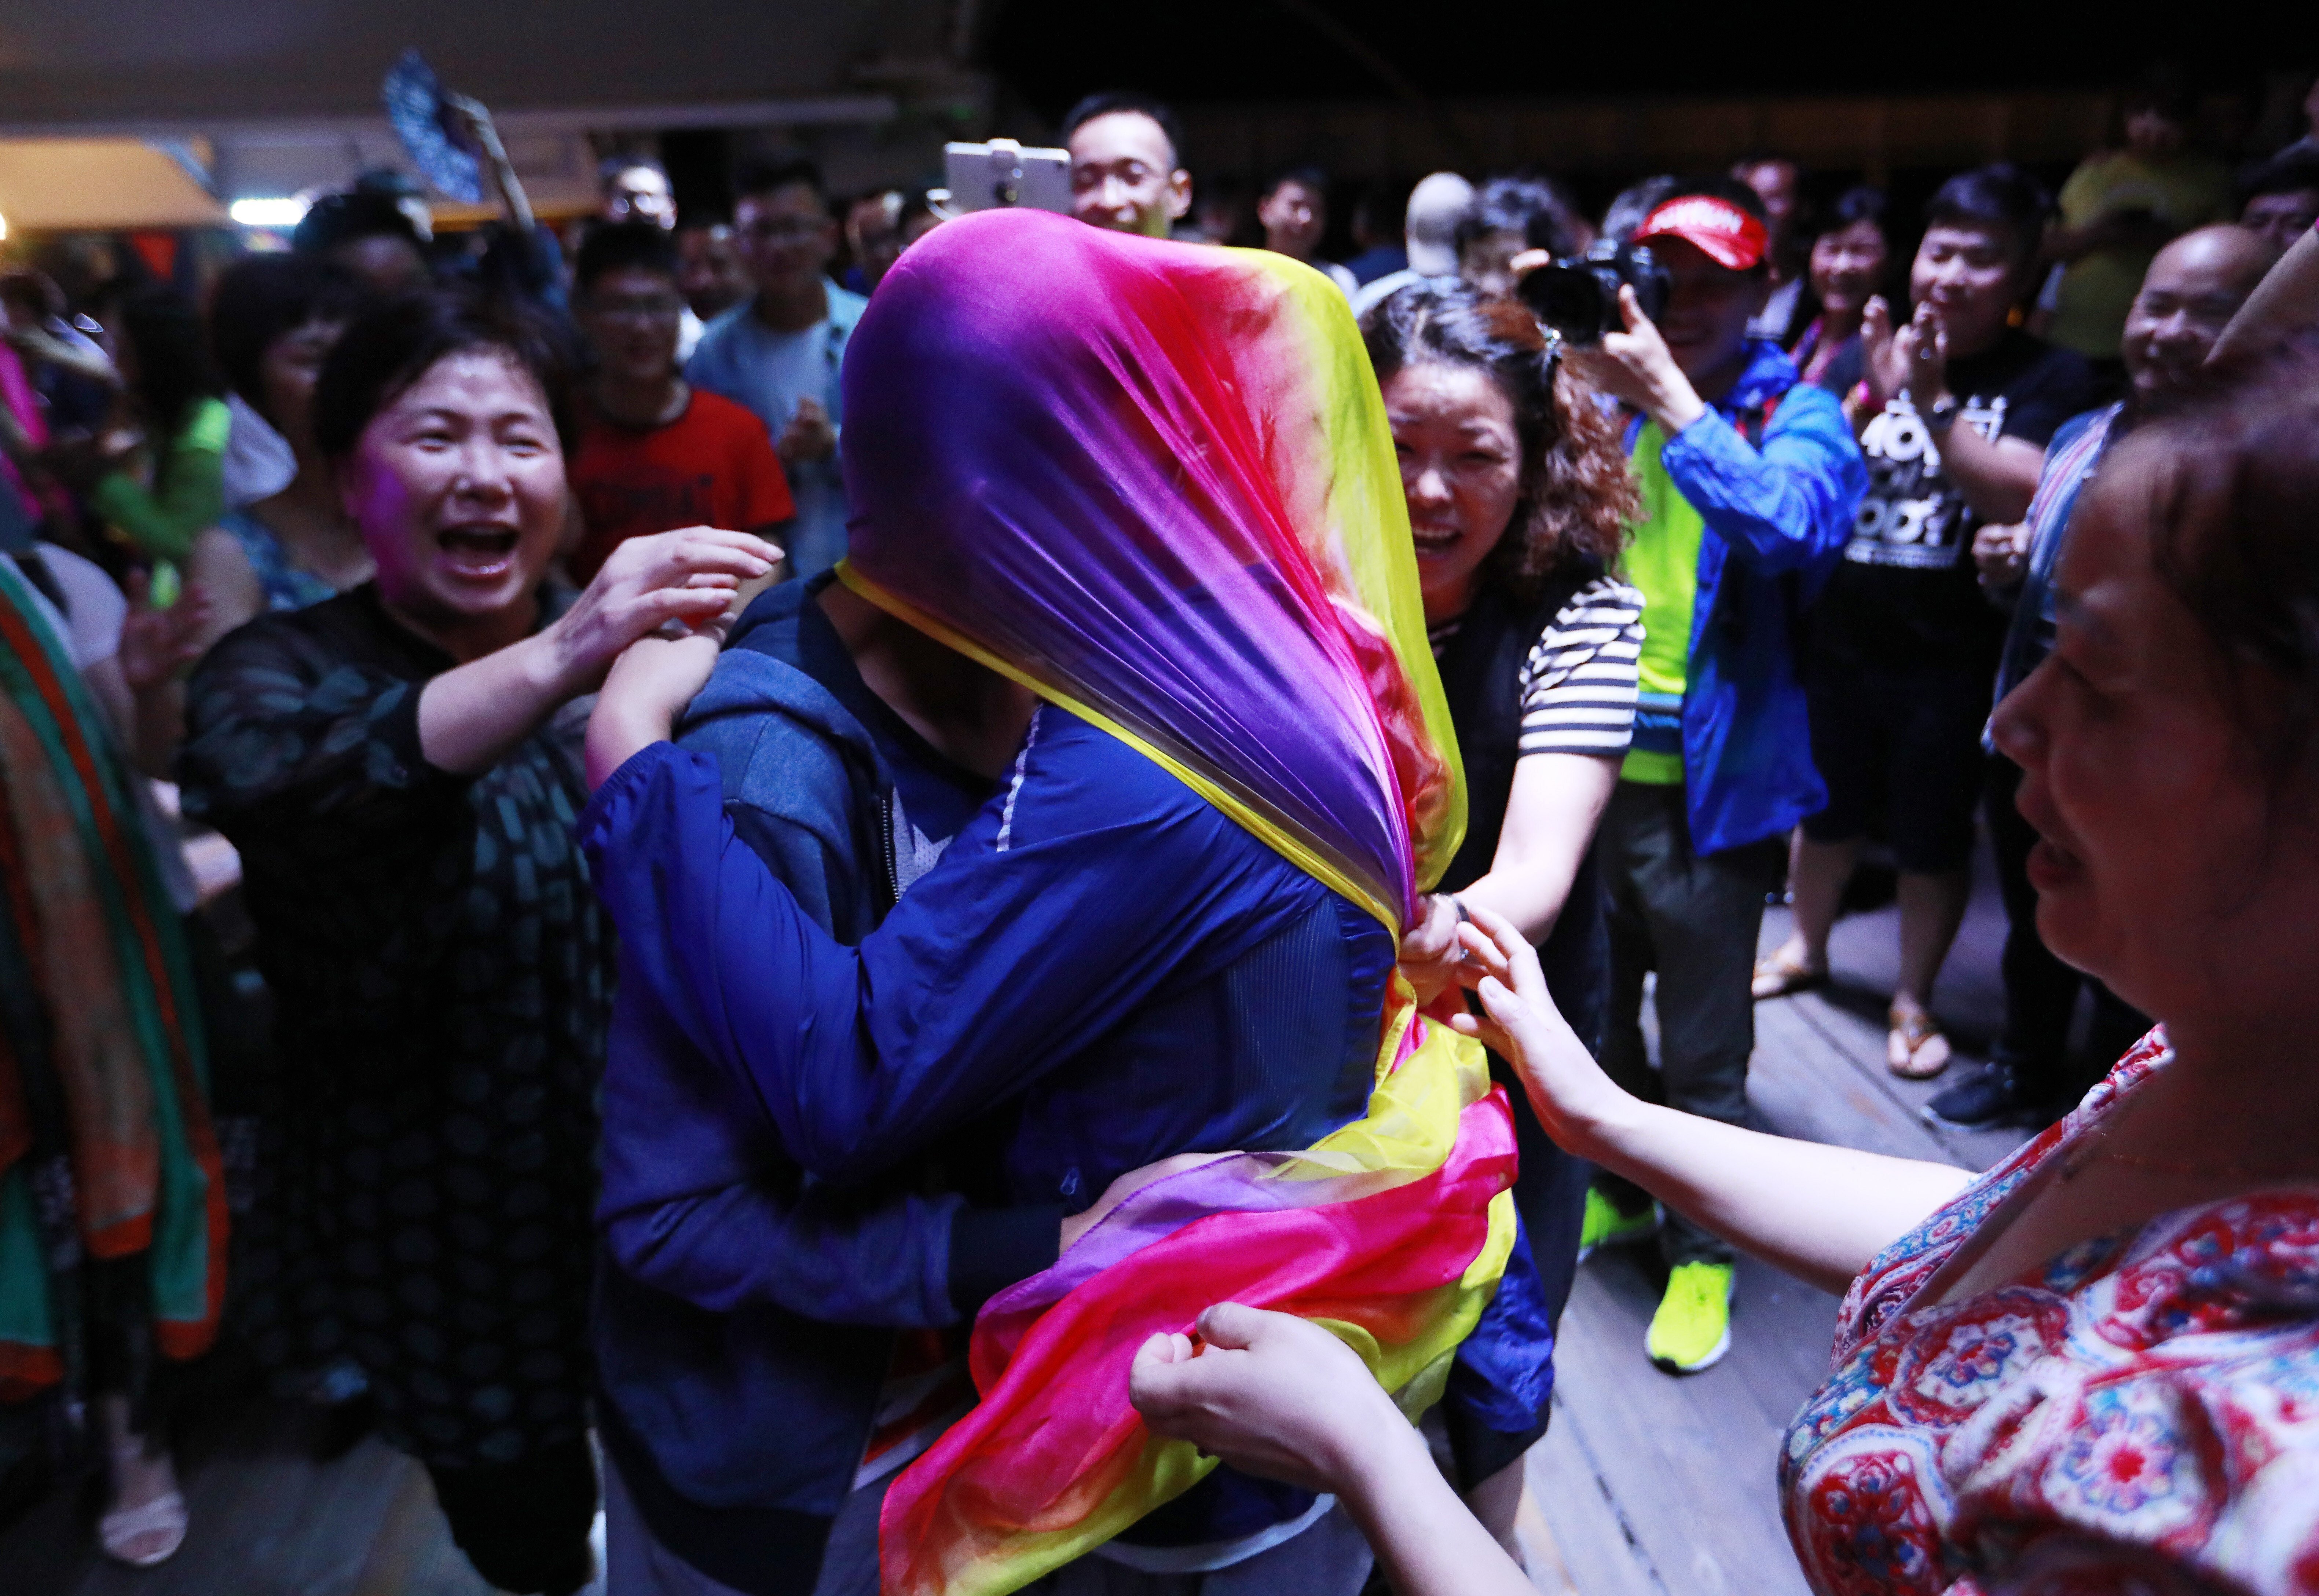 A gay couple kisses under a rainbow-coloured scarf during a party after a mass wedding organised by the Parents and Friends of Lesbians and Gays (PFLAG) China organisation on a cruise in the open seas en route to Sasebo, Japan, on June 15, 2017. About 800 members of the Chinese LGBT community and their parents spent four days on a cruise trip organised by the NGO. Photo: EPA